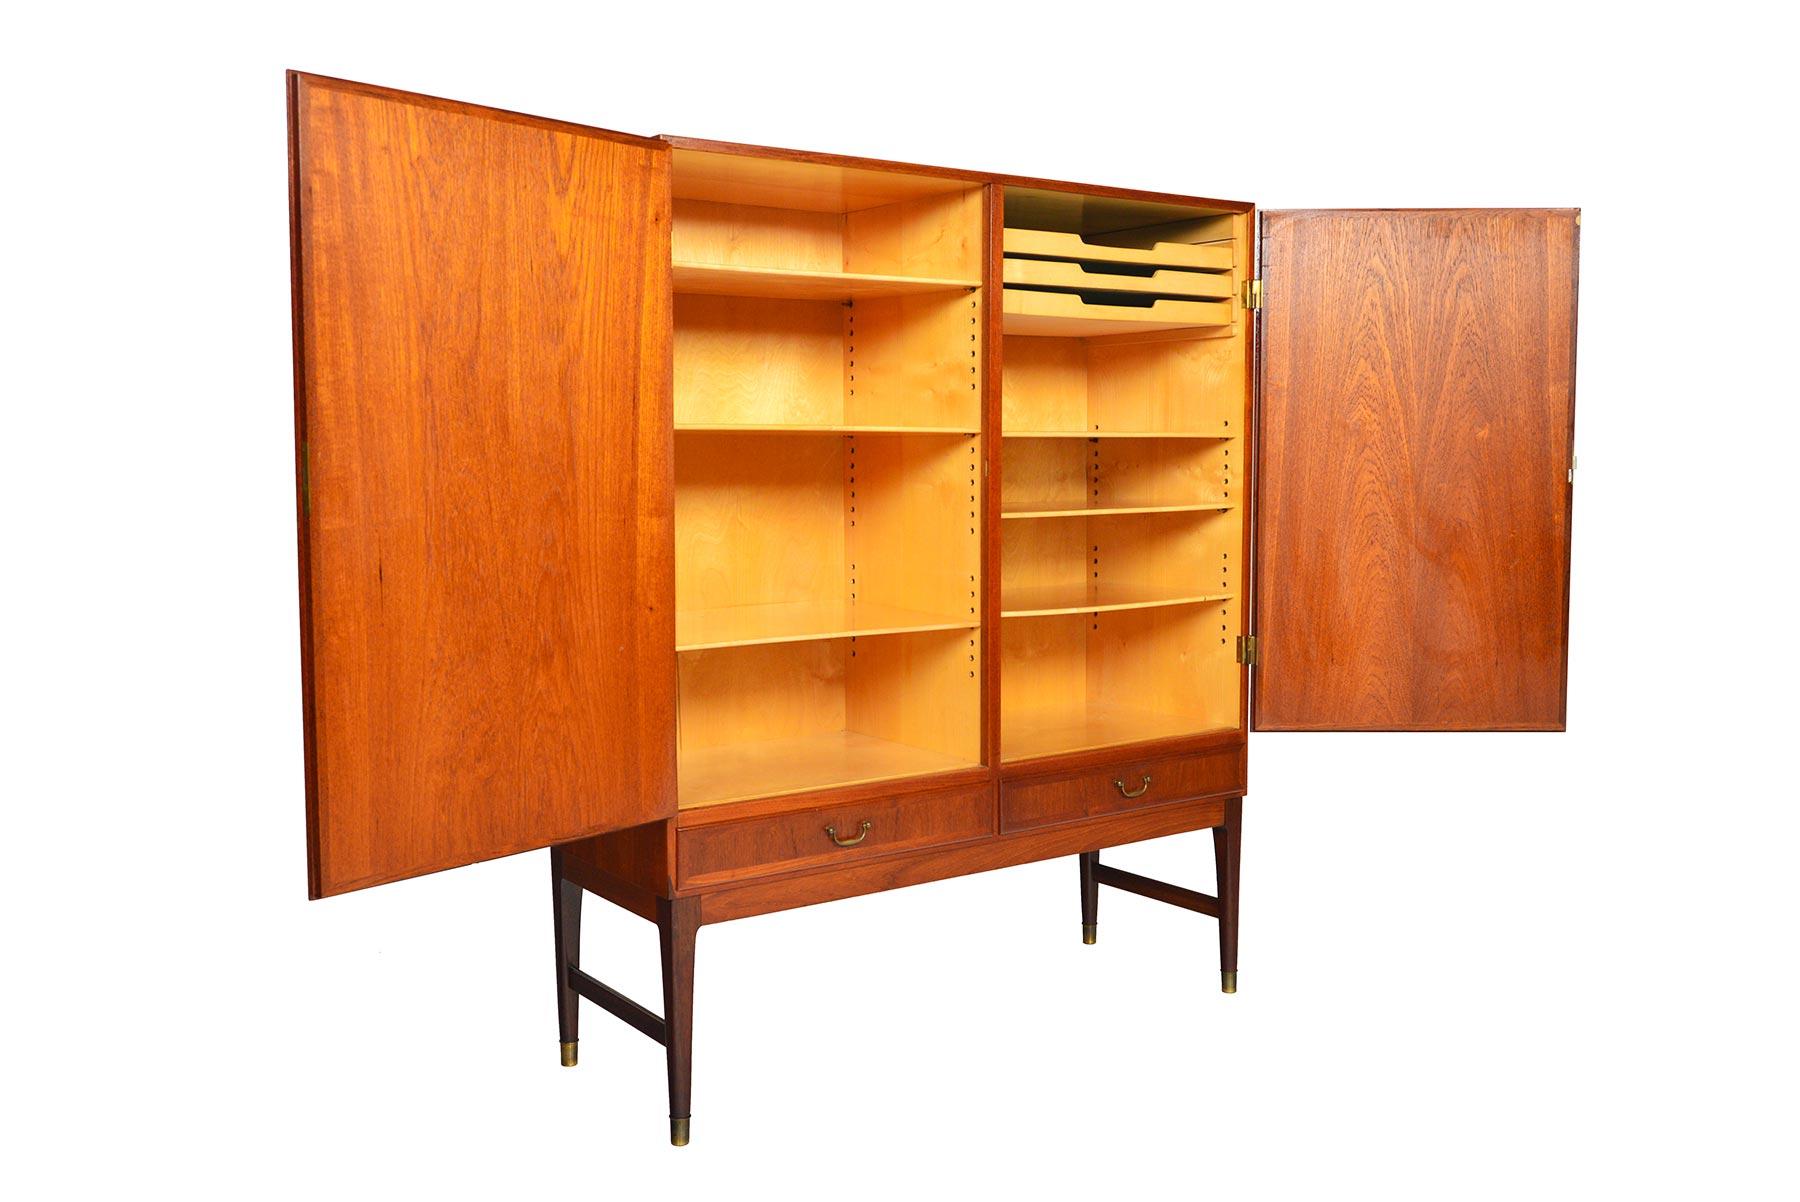 This Danish modern teak bureau offers a large storage capacity and sleek design. Two large locking doors open to reveal a beech- lined, two bay interior outfitted with six adjustable shelves and three drawers. Two lower drawers with original brass